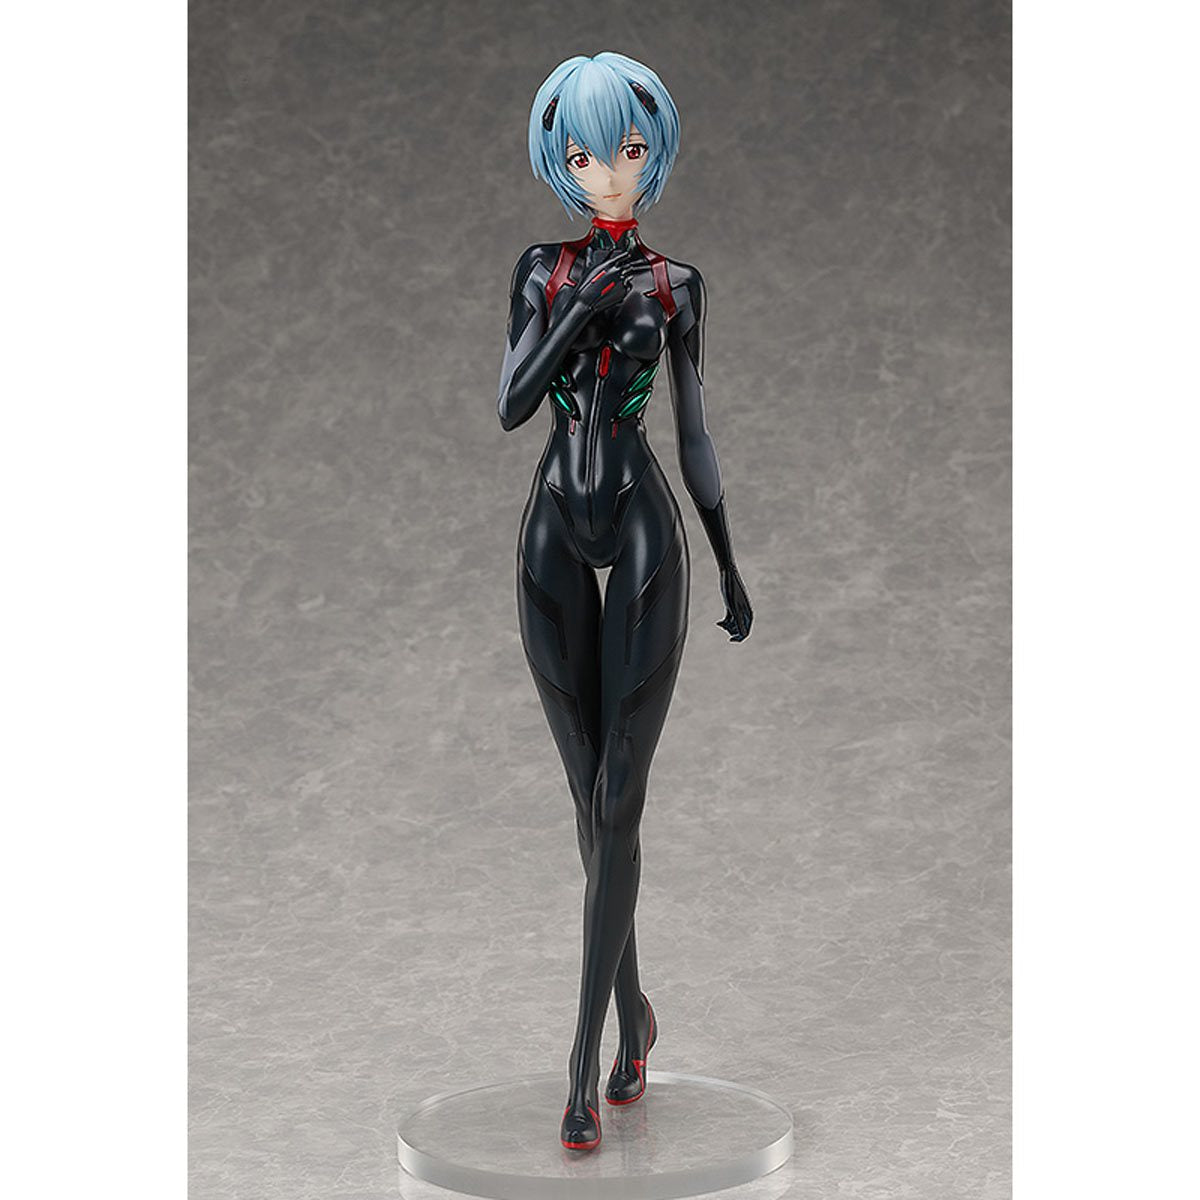 Rebuild of Evangelion - Rei Ayanami 1/4th Scale Figure Freeing